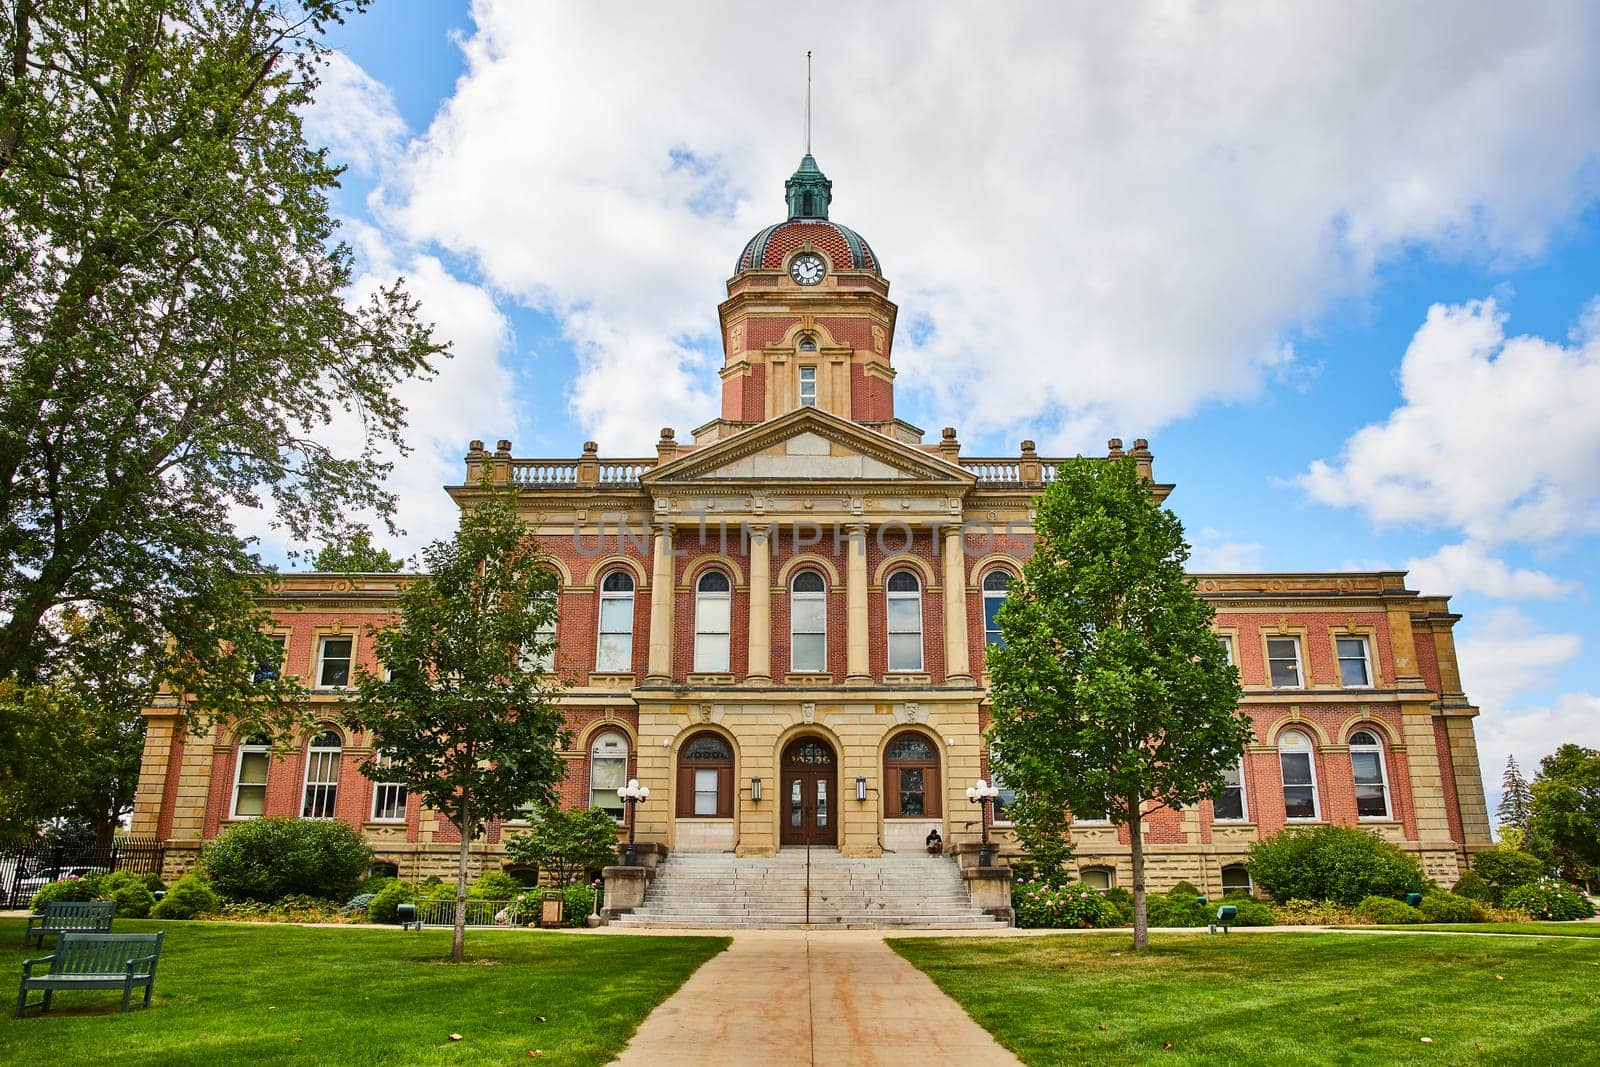 Image of Elkhart County courthouse on bright summer day with cloudy blue sky, law and order, Indiana